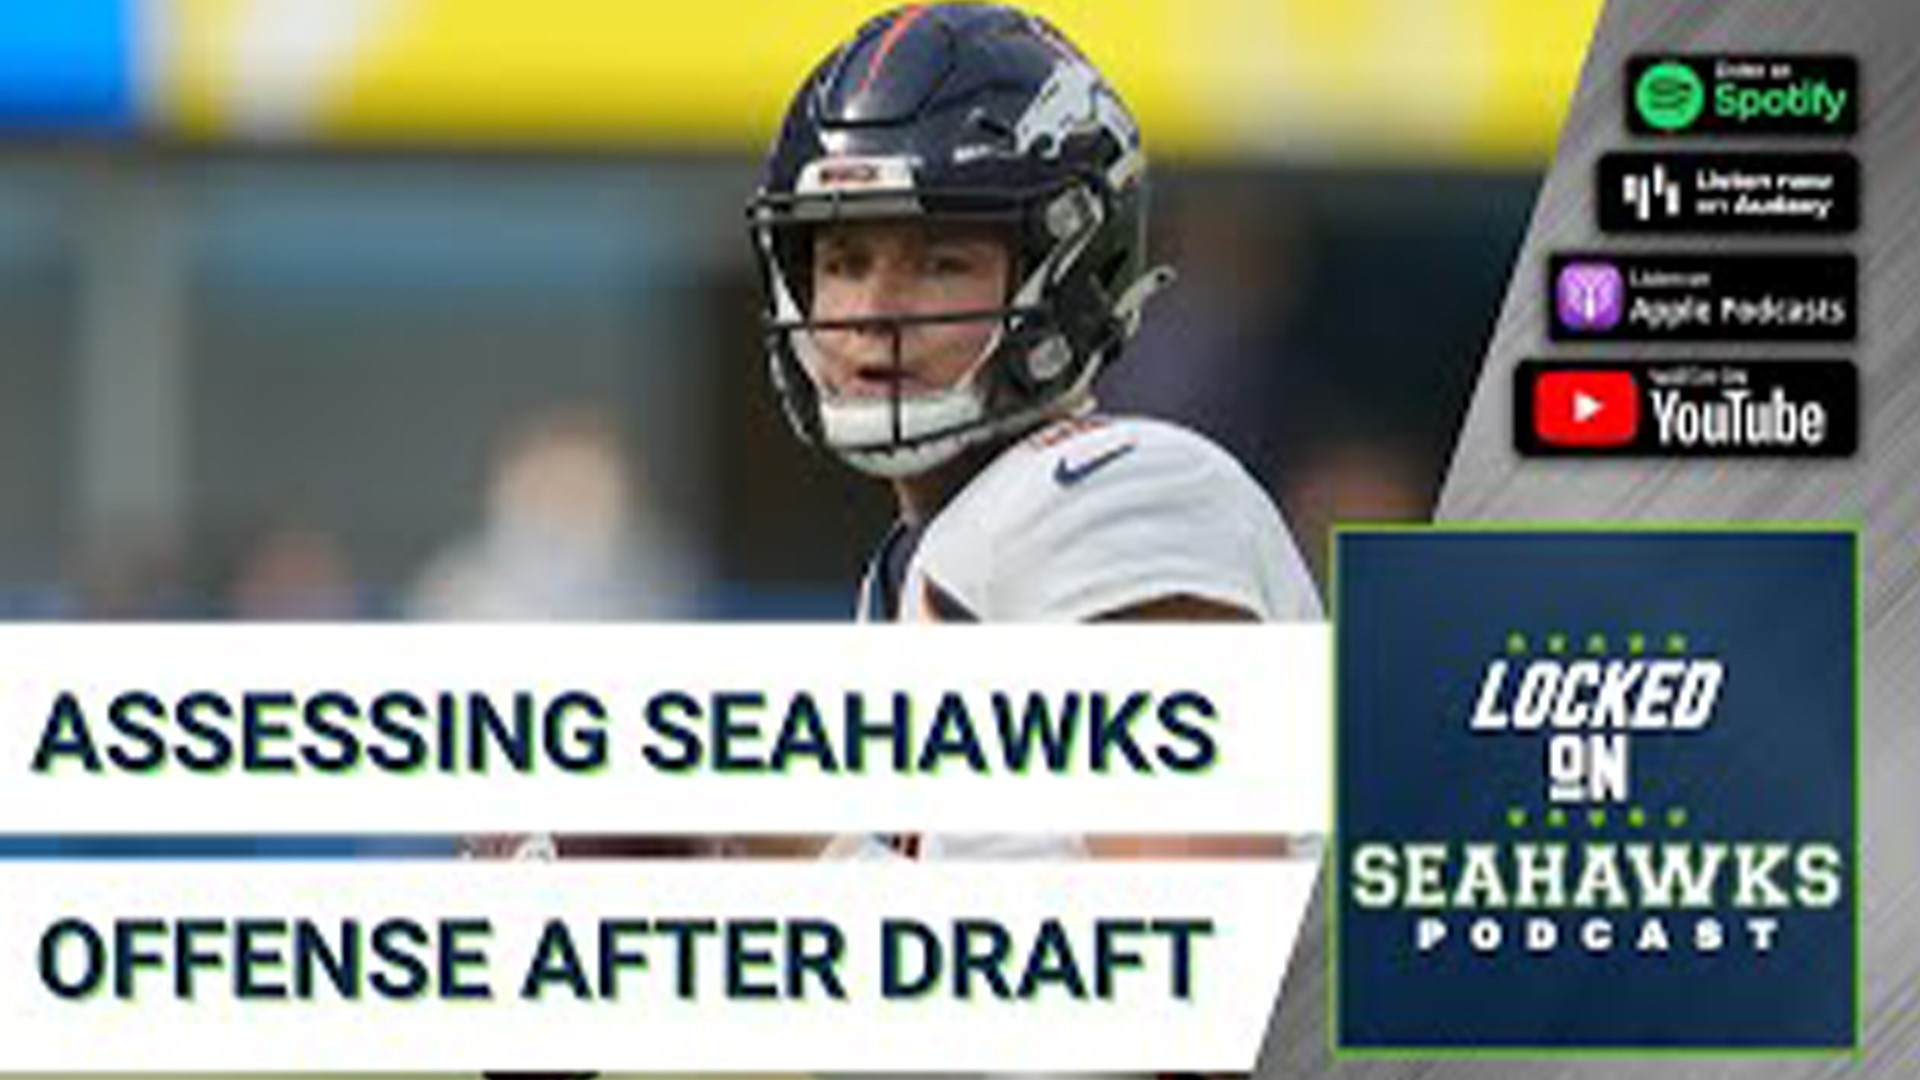 Though it's only mid-May and training camp remains more than two months away, it's never too early to start projecting who will make the Seahawks 53-man roster.